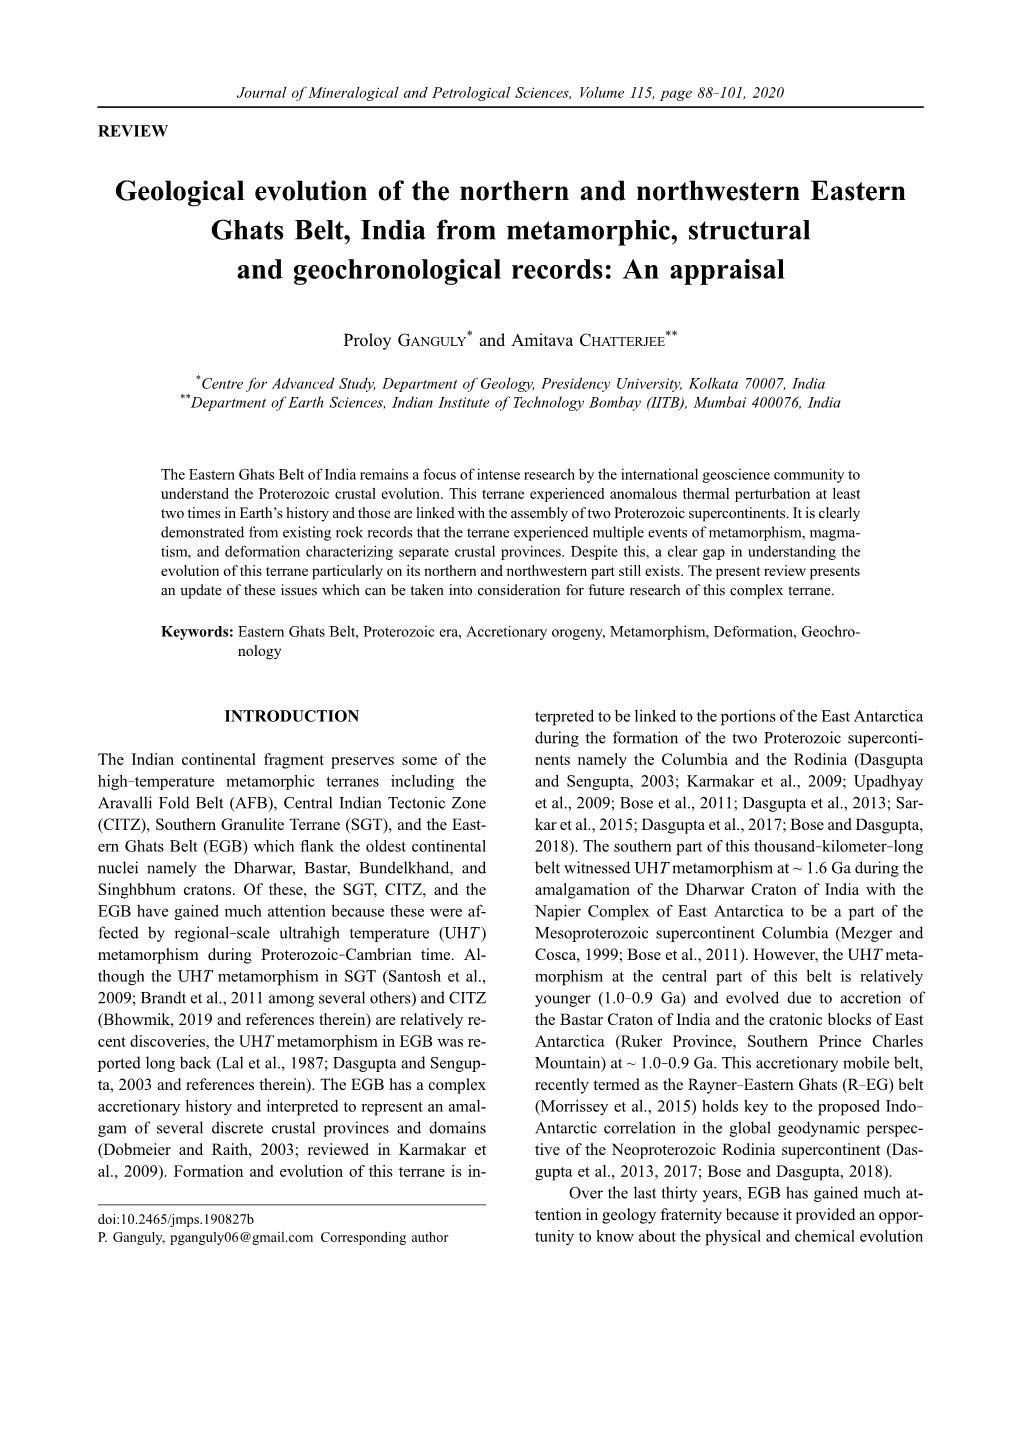 Geological Evolution of the Northern and Northwestern Eastern Ghats Belt, India from Metamorphic, Structural and Geochronological Records: an Appraisal